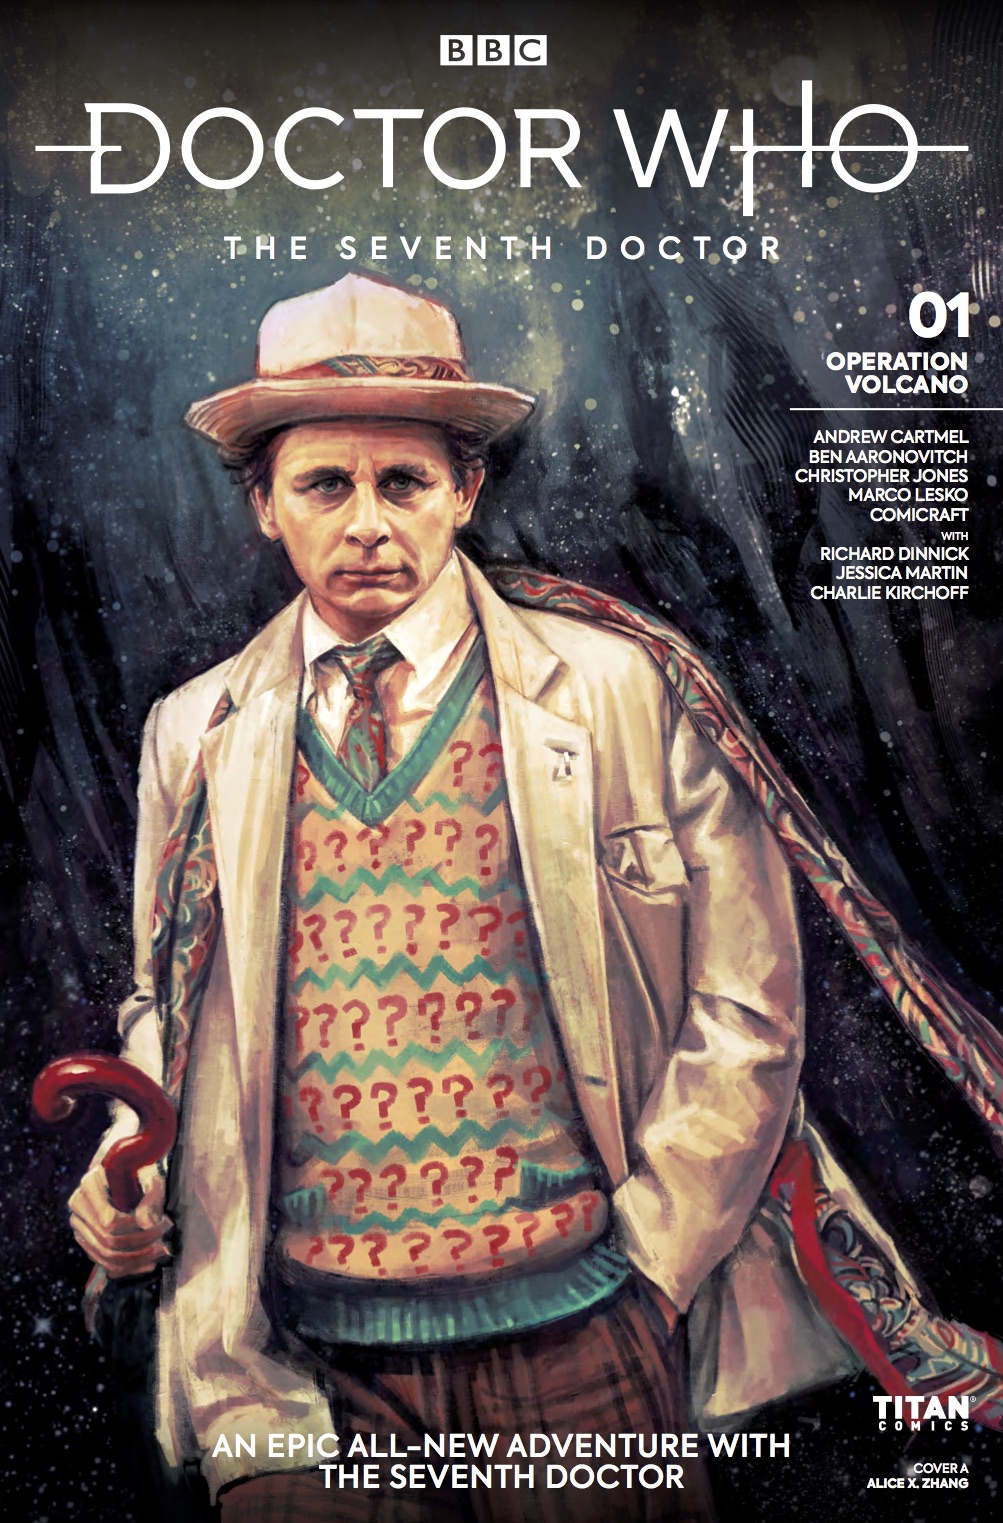 Doctor Who - The Seventh Doctor - Operation Volcano #1 Cover A by Alice X. Zhang